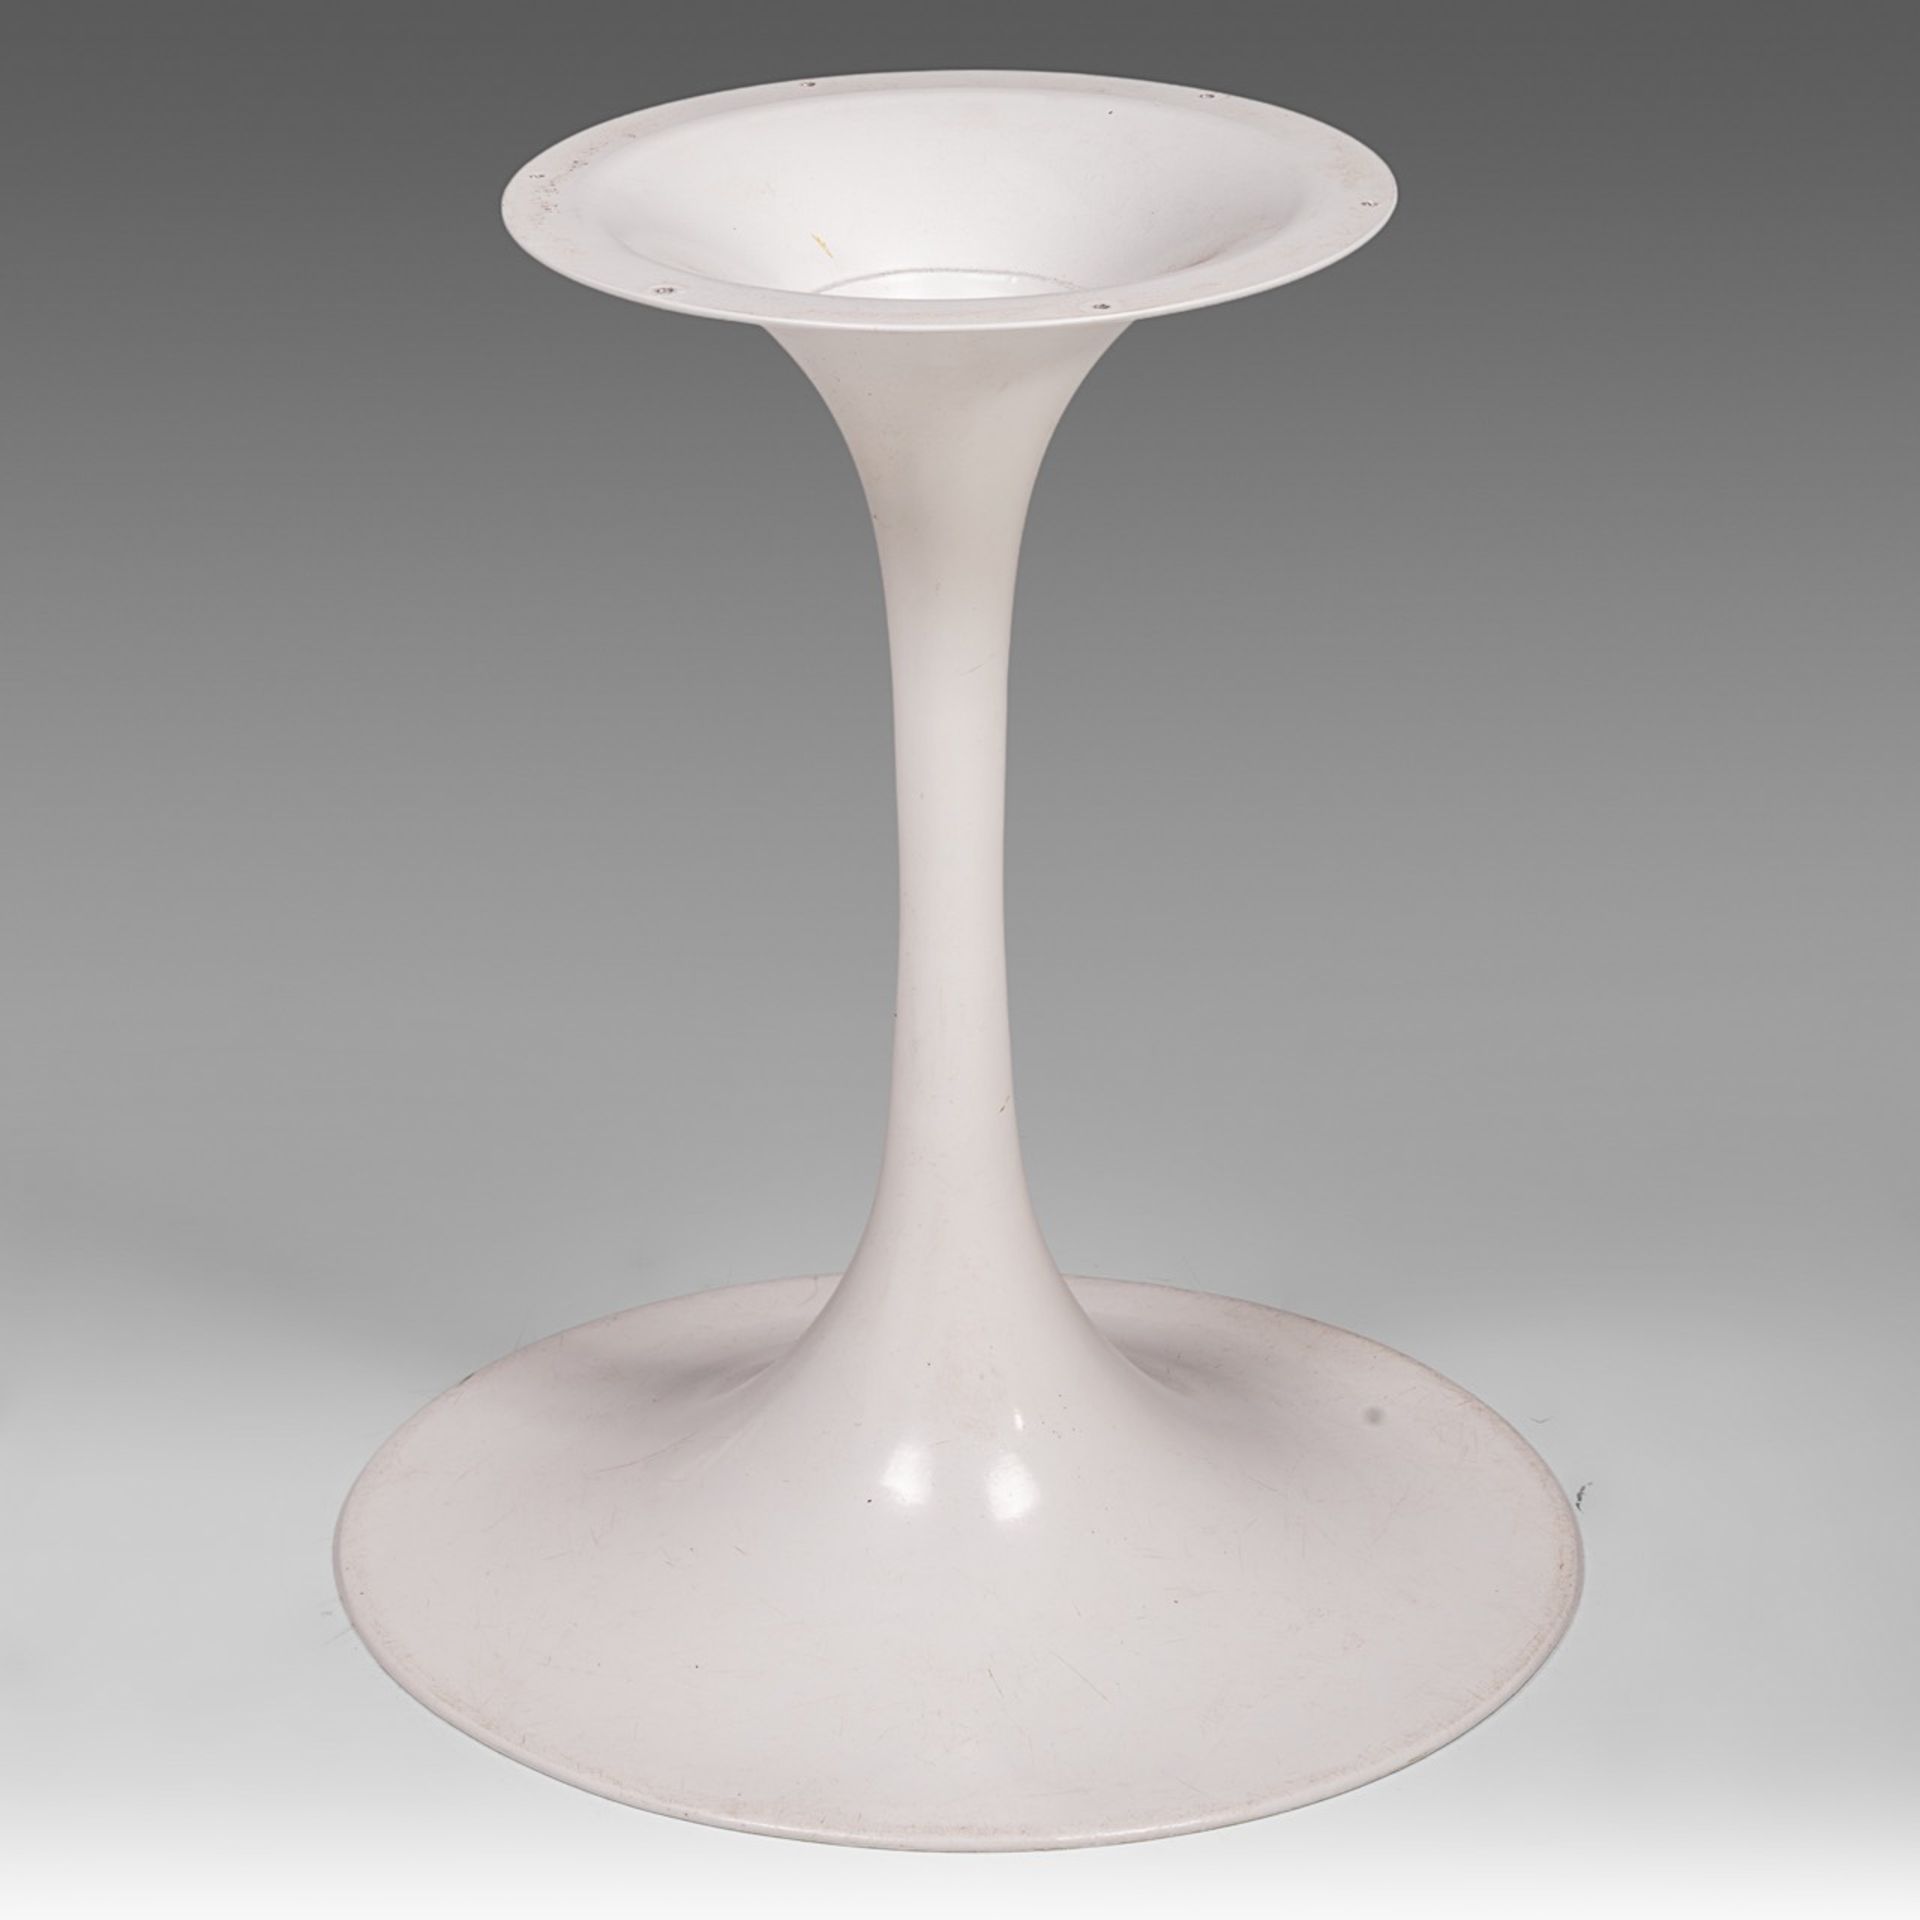 A vintage white coated 'Tulip' dining table, designed by Eero Saarinen for Knoll, H 72 - dia 150 cm - Bild 5 aus 6